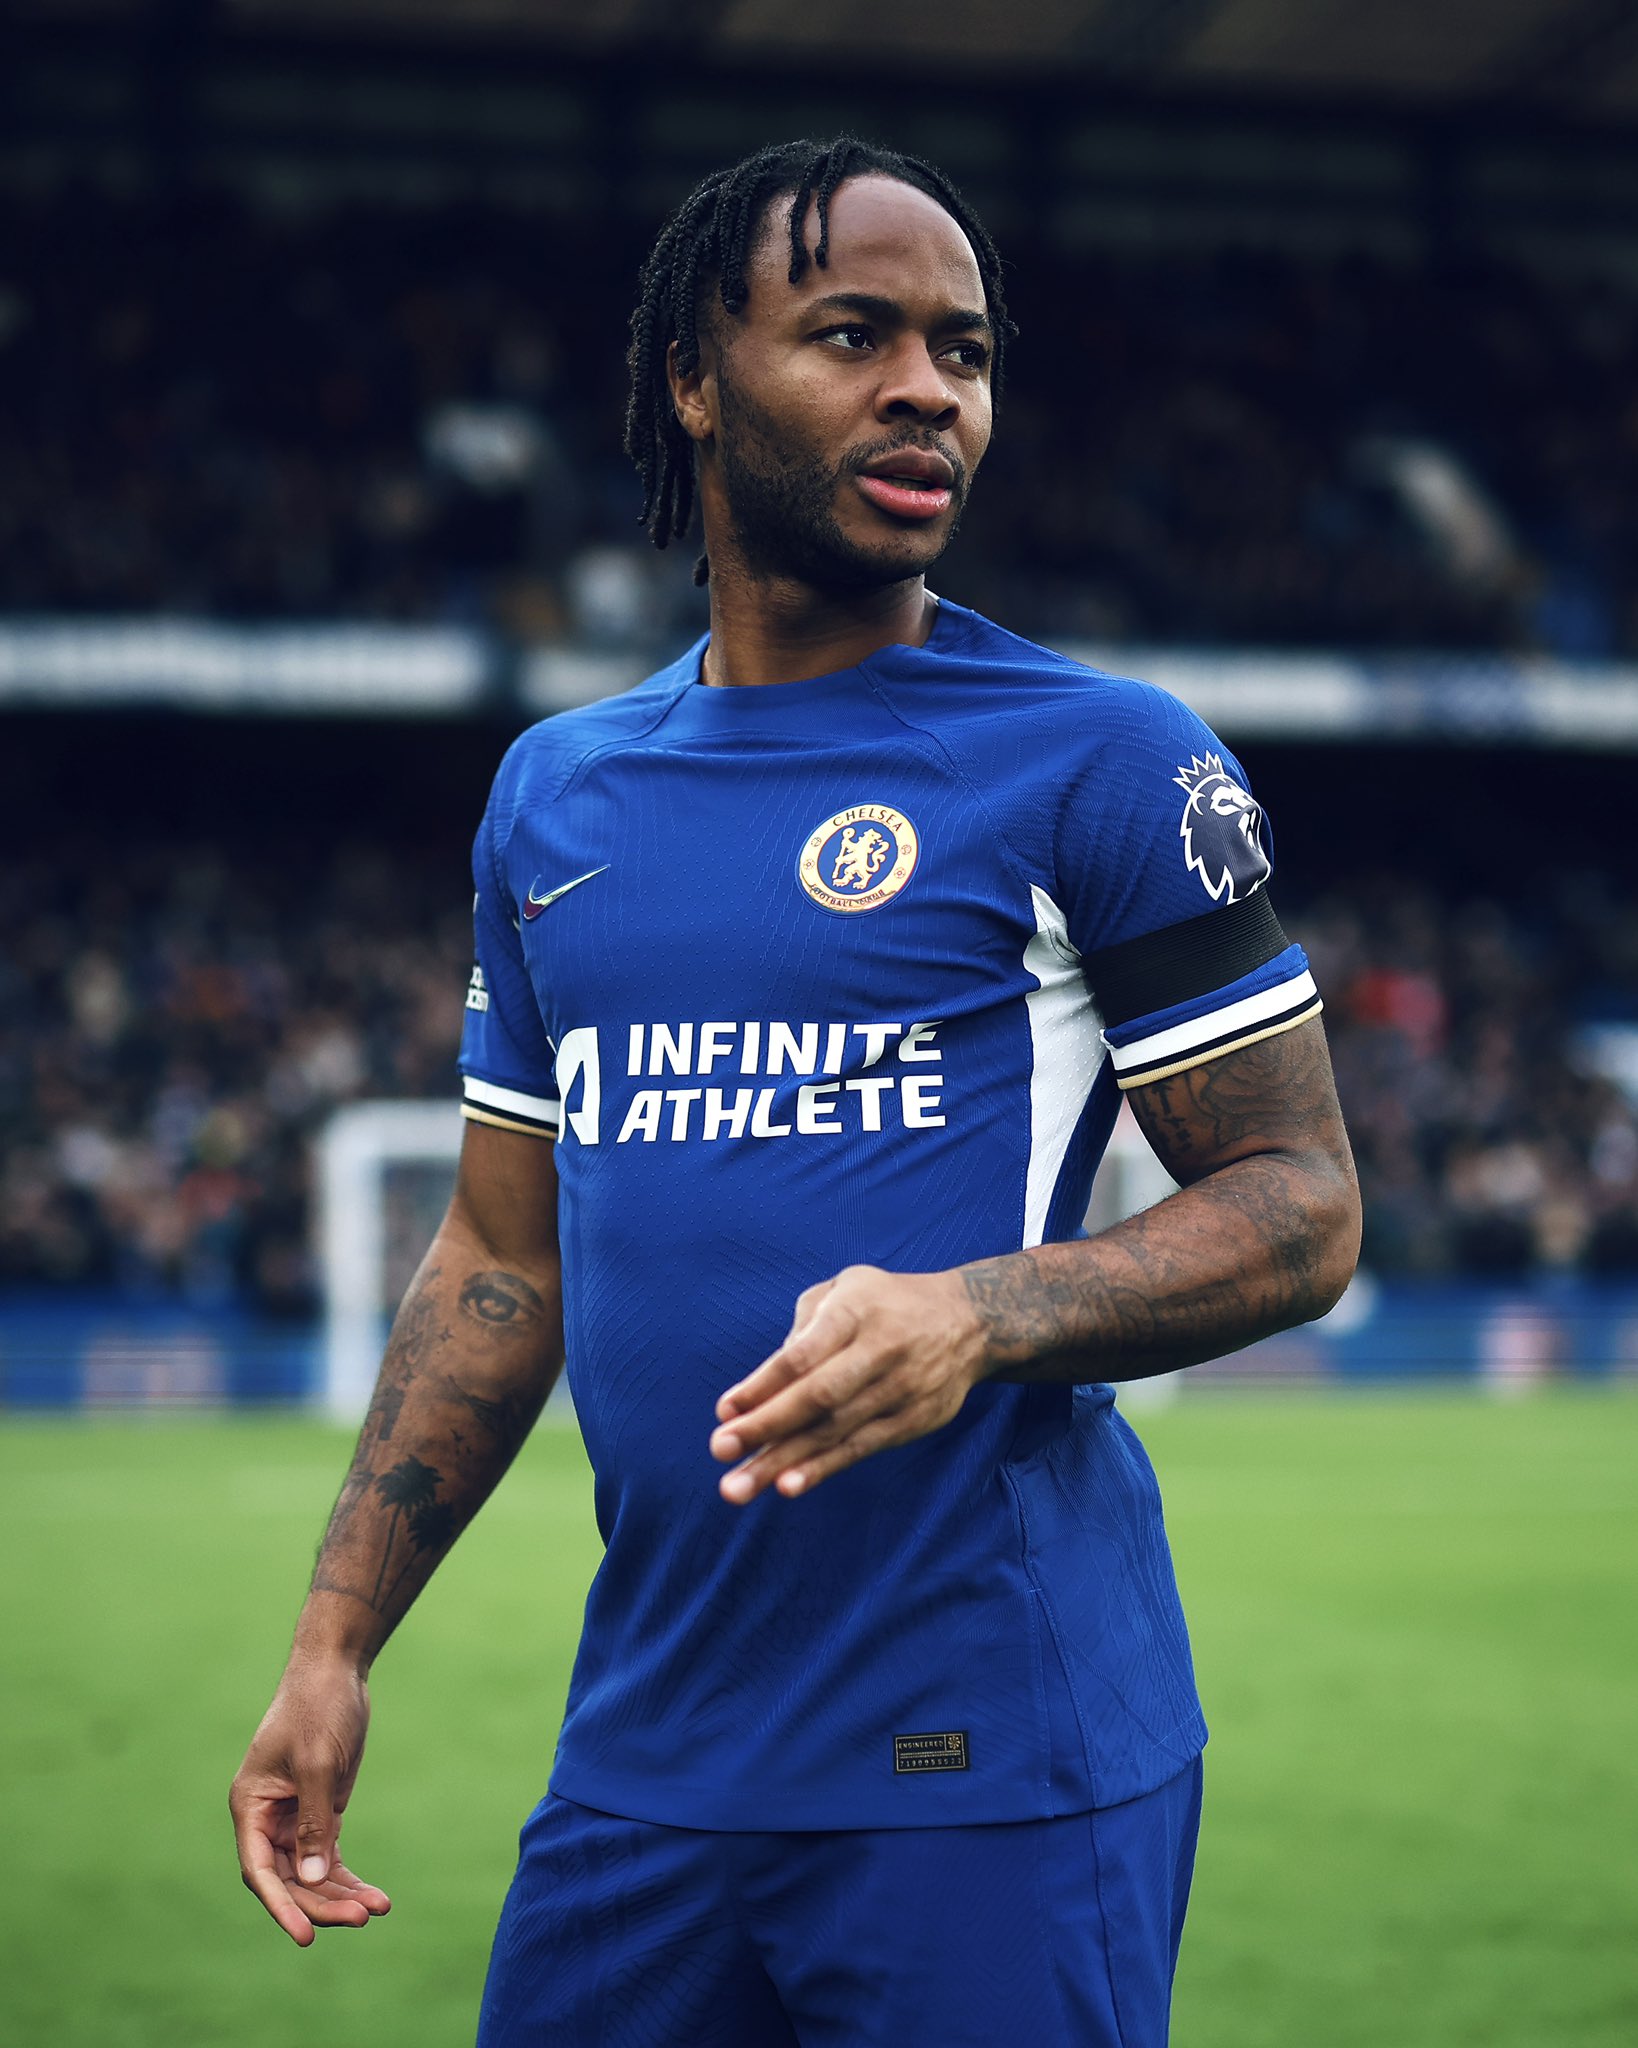 Chelsea star responds violently to criticism of his teammate Raheem Sterling as harsh and unfair.